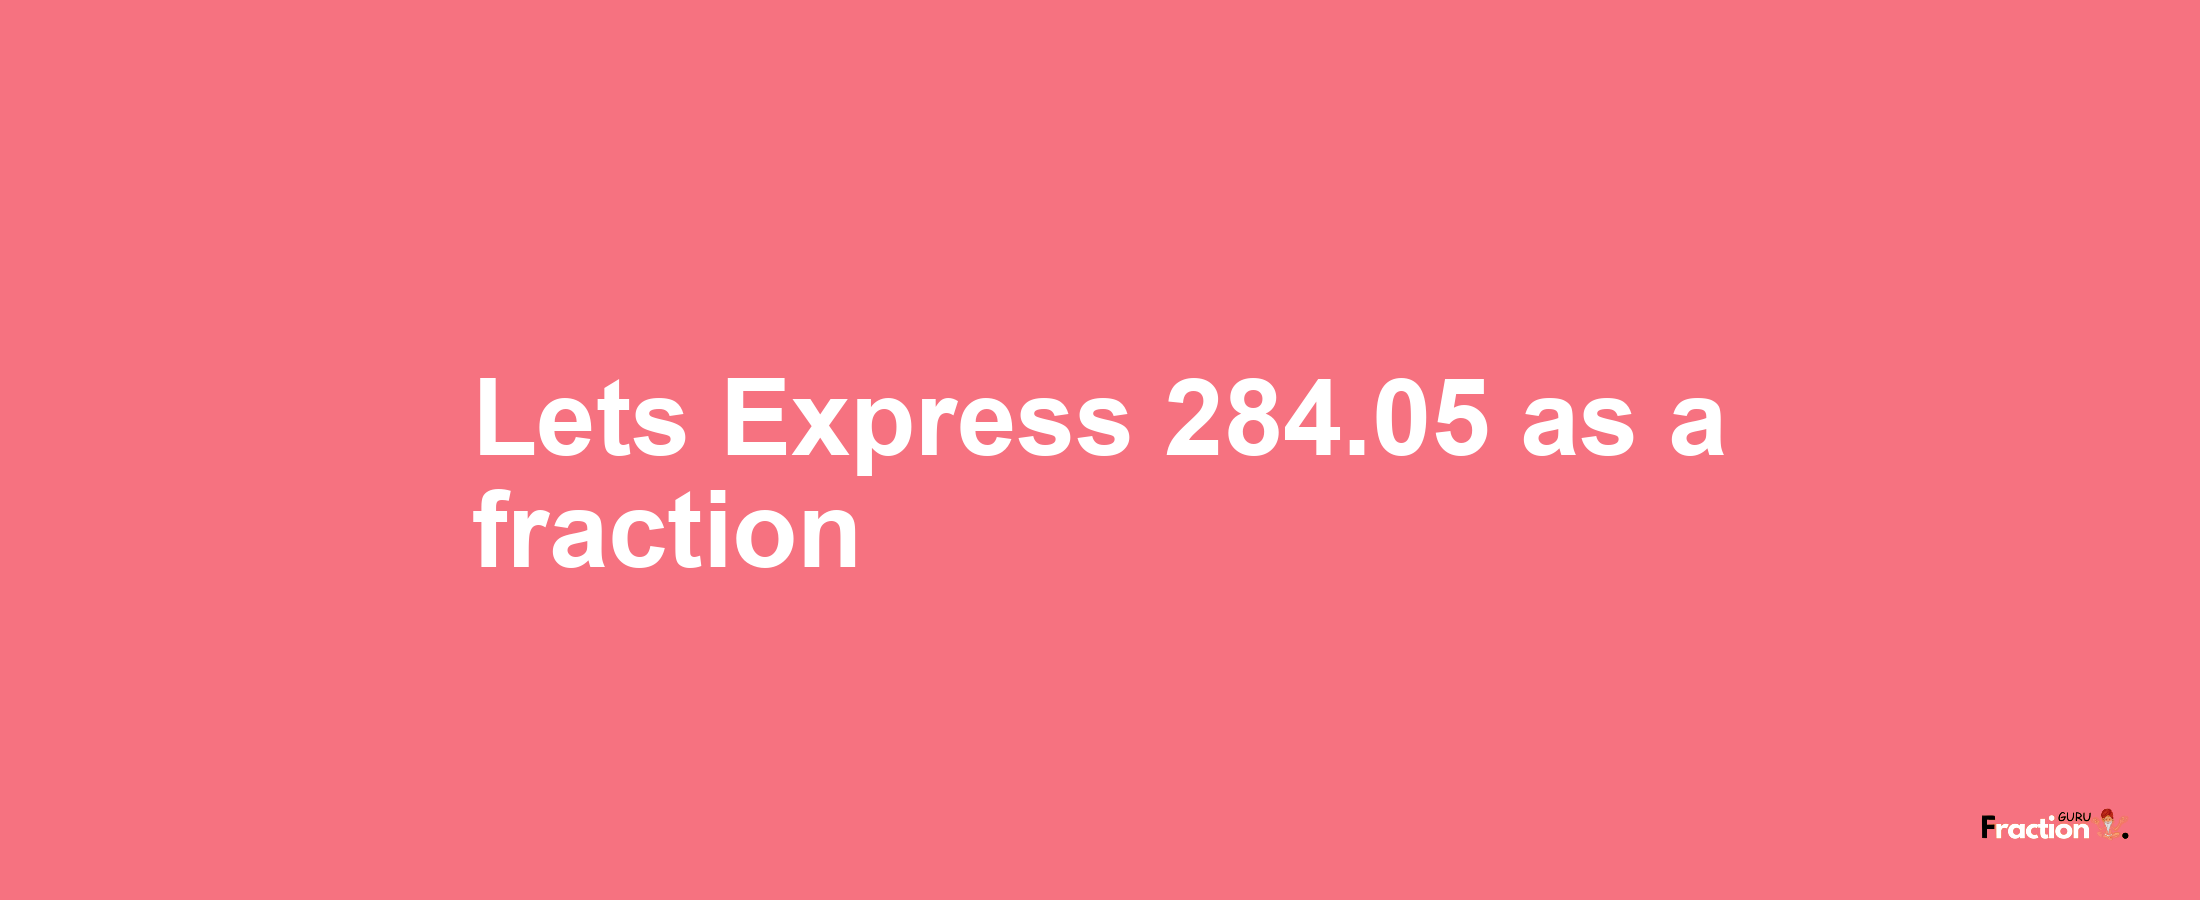 Lets Express 284.05 as afraction